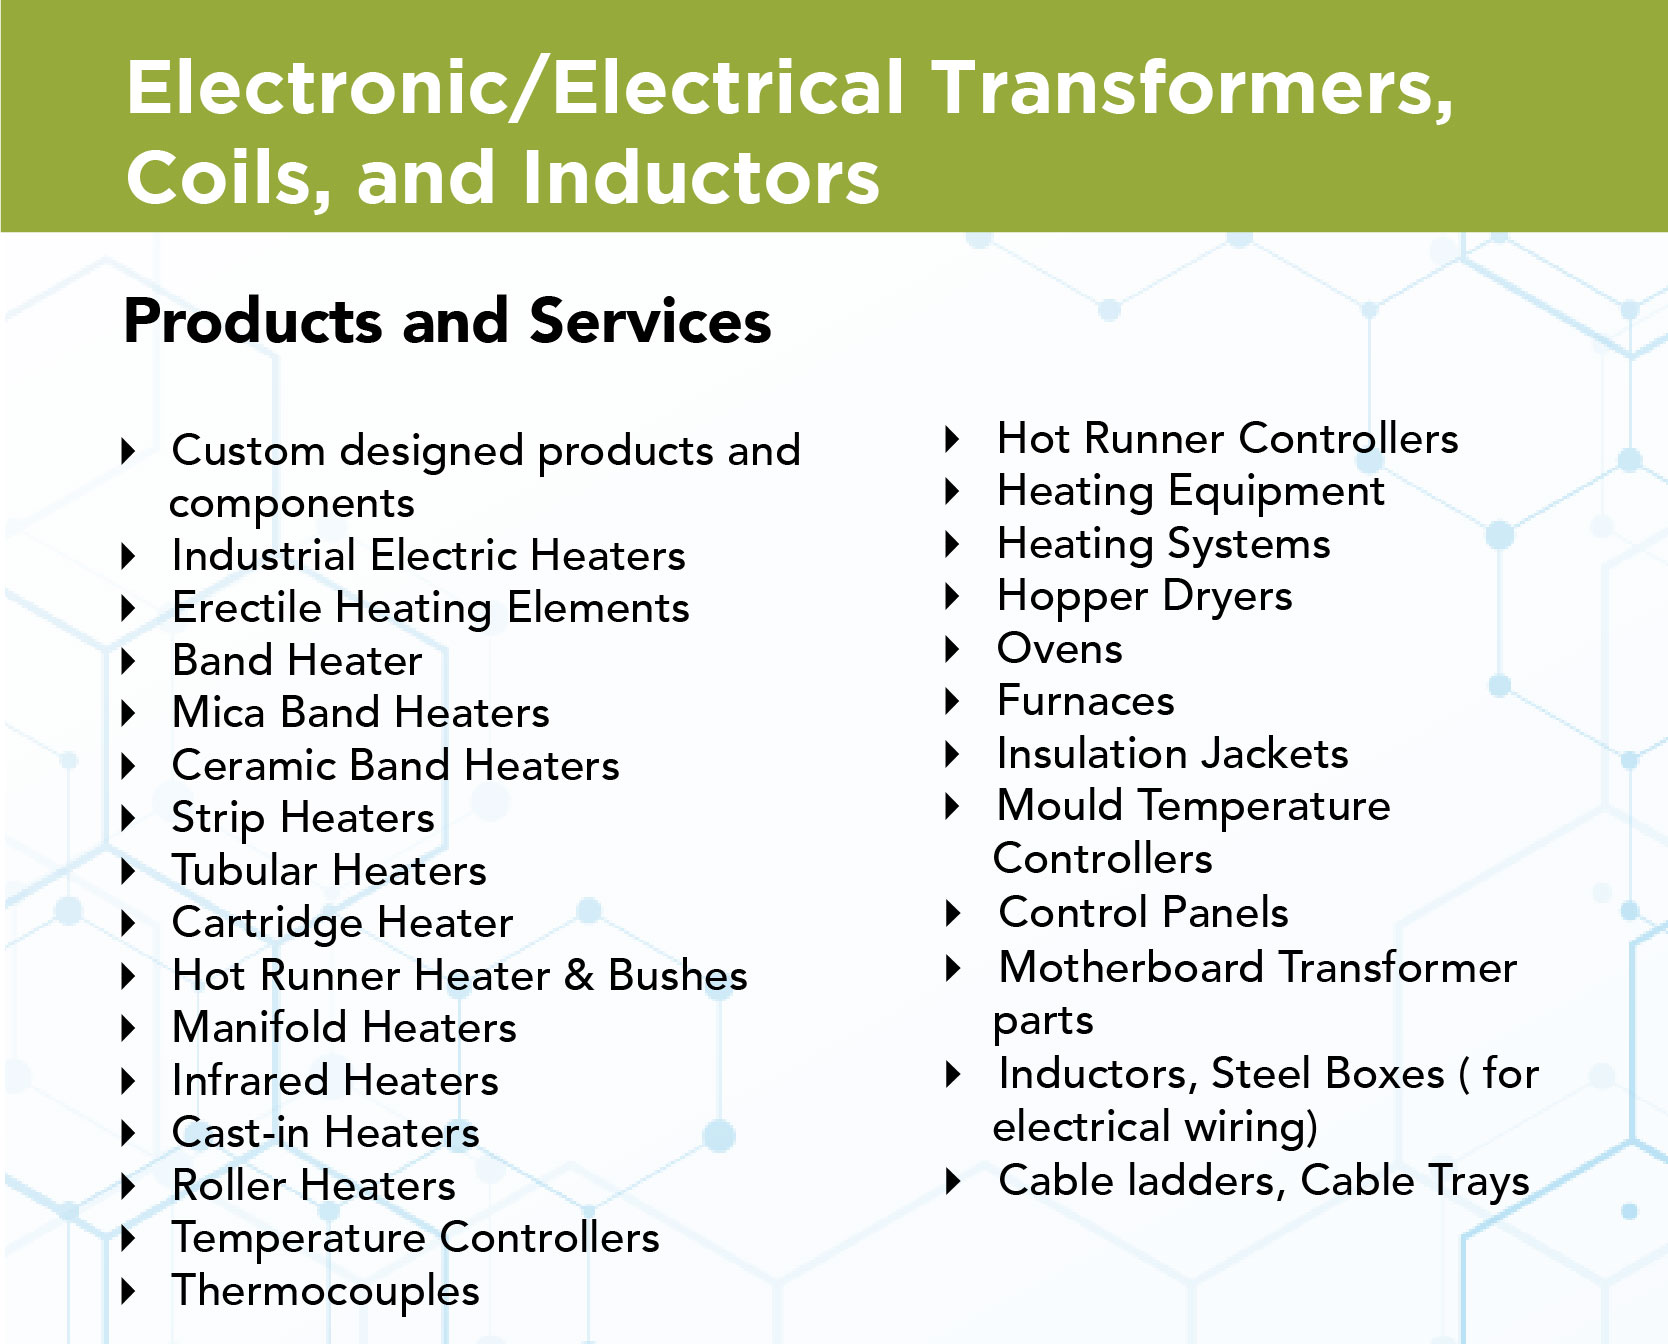 Electronic/Electrical Transformers, Coils, and inductors